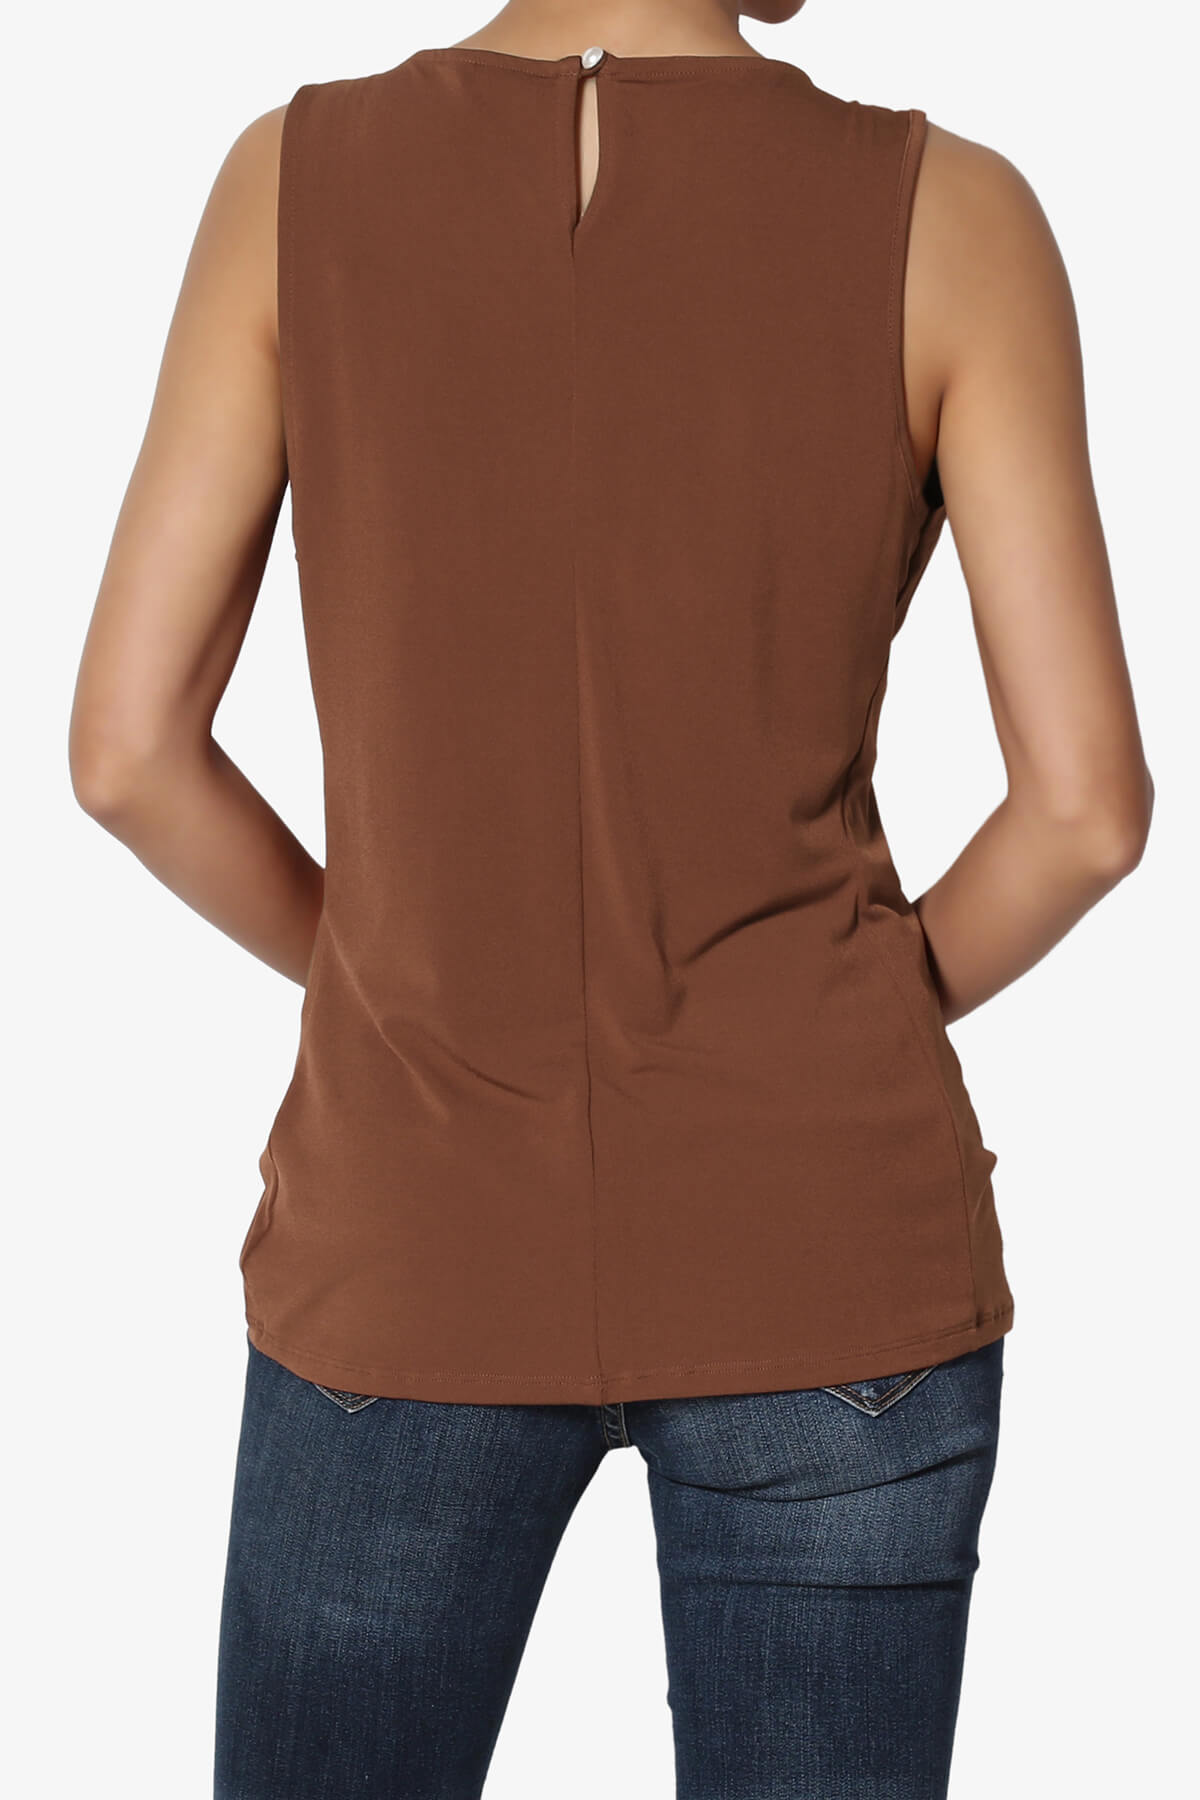 Load image into Gallery viewer, Chaffee Pleat Neck Tank Top LIGHT BROWN_2
